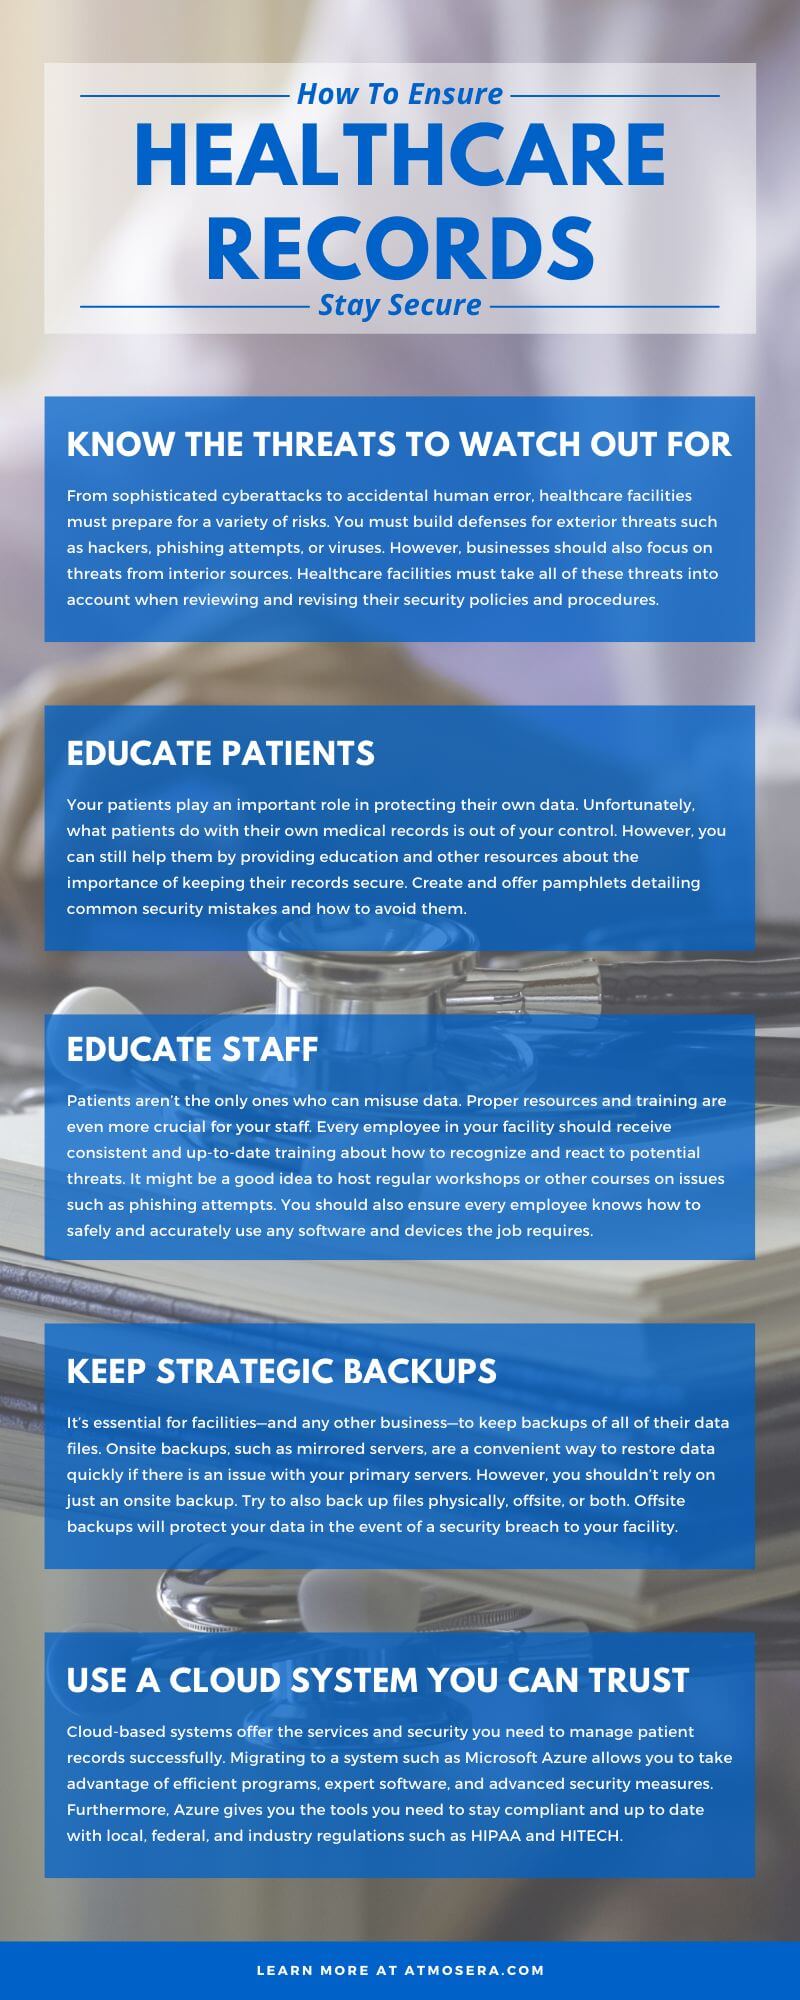 How To Ensure Healthcare Records Stay Secure